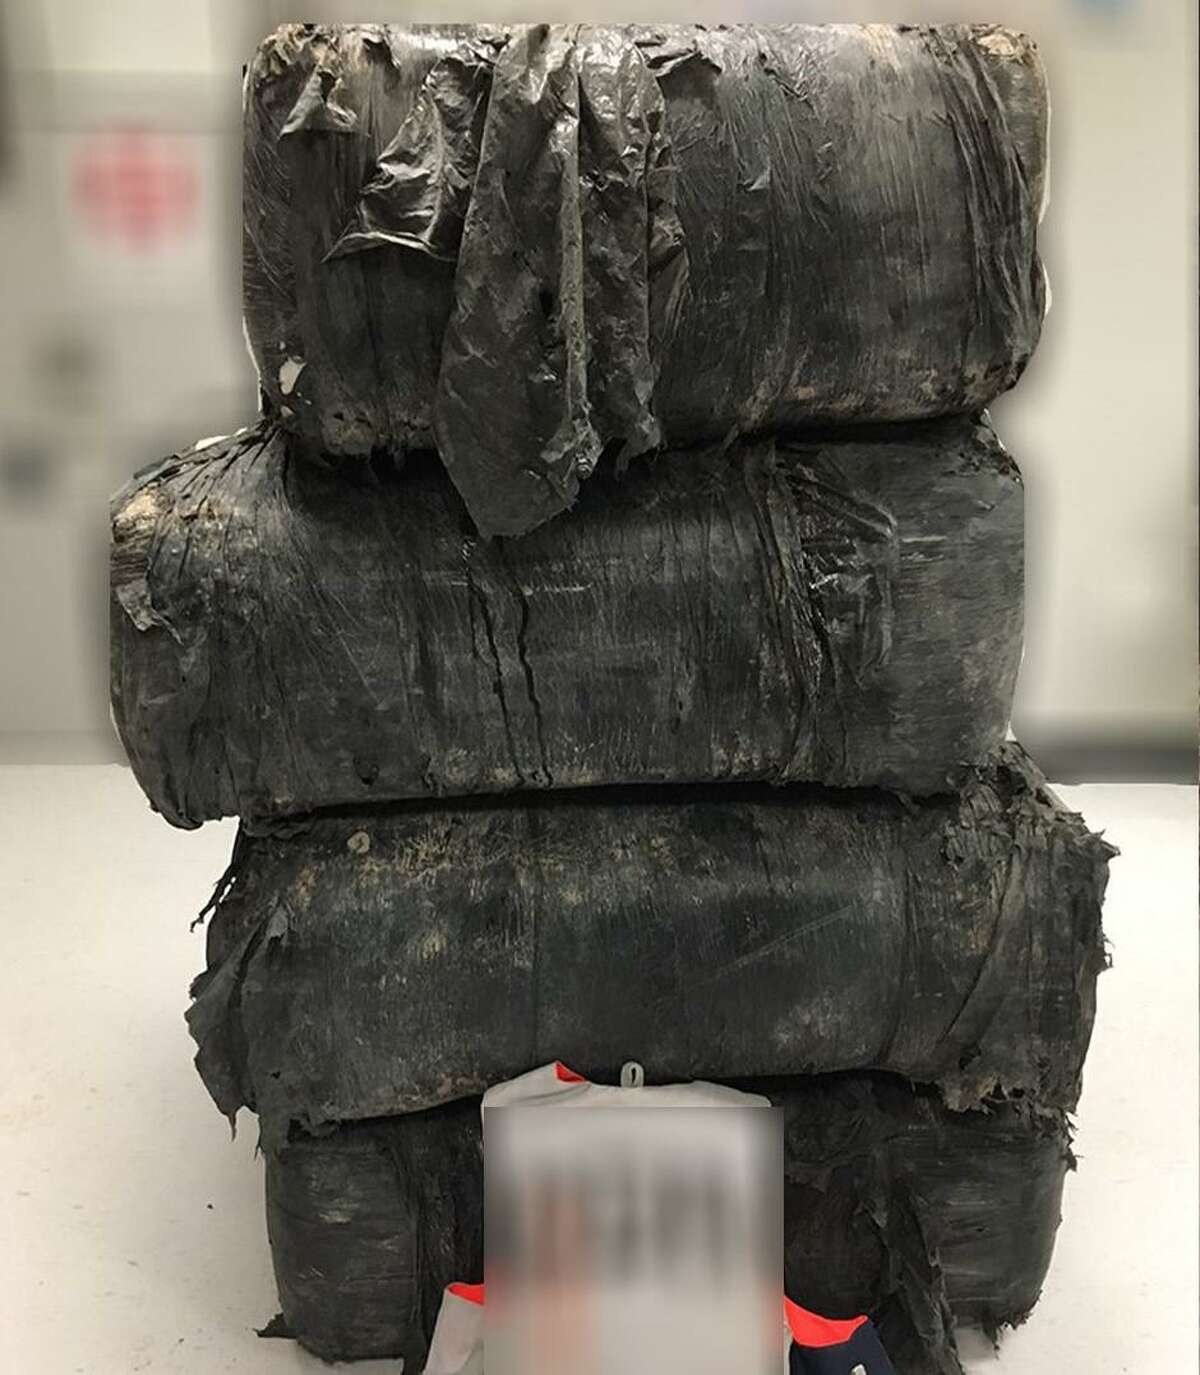 U.S. Border Patrol agents detained a man and seized more than 300 pounds of marijuana at a ranch located northwest of Laredo. The Drug Enforcement Administration took over the investigation.